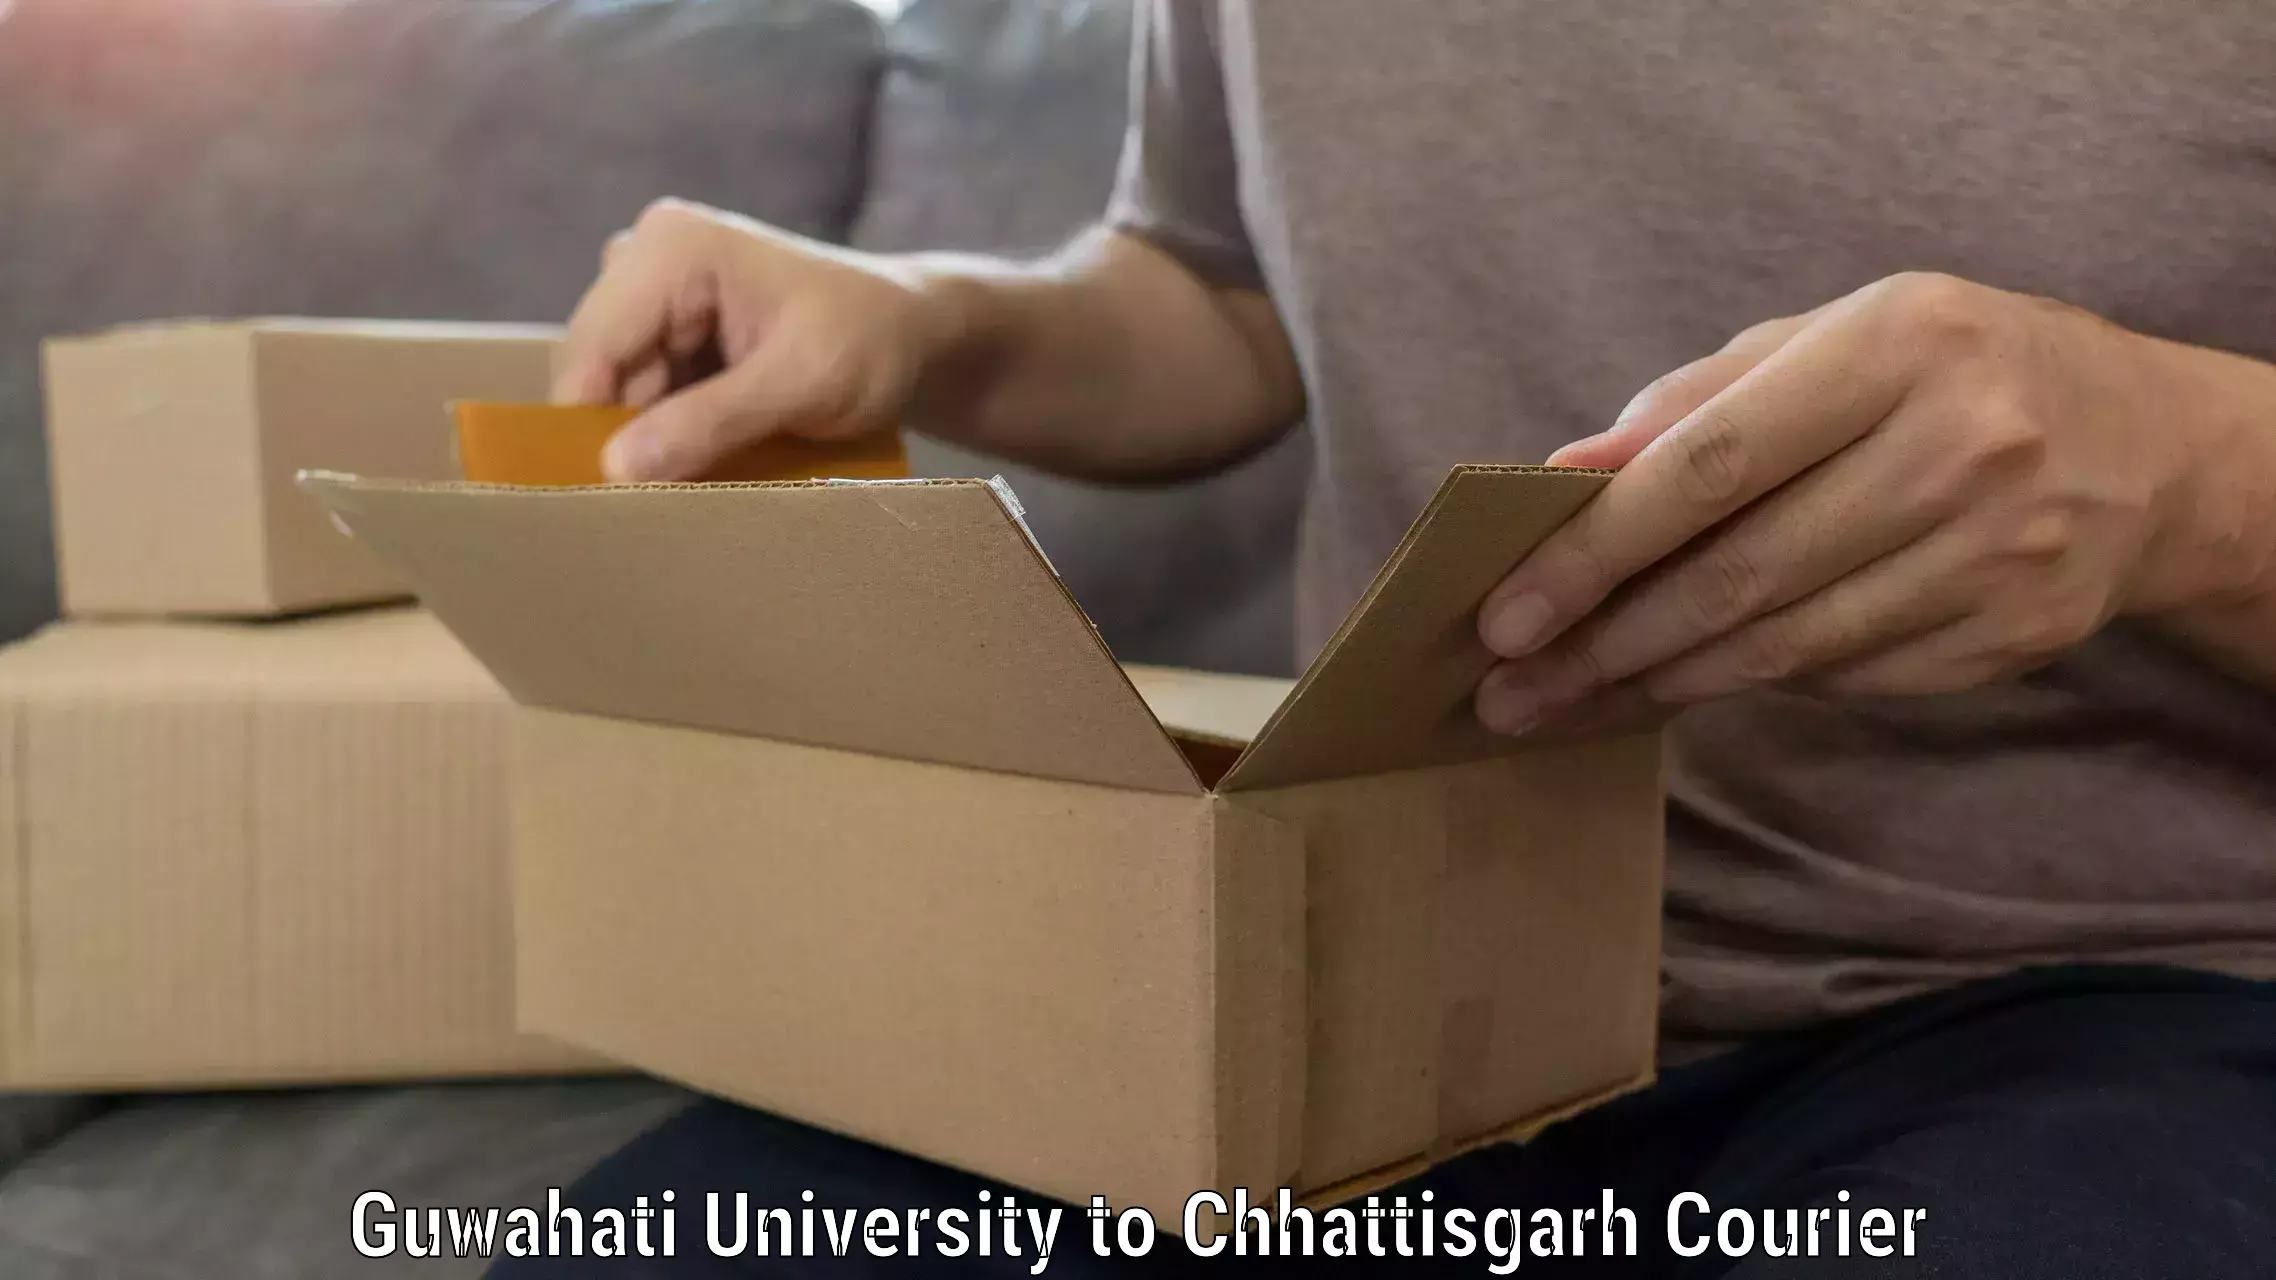 Professional relocation services in Guwahati University to Khairagarh